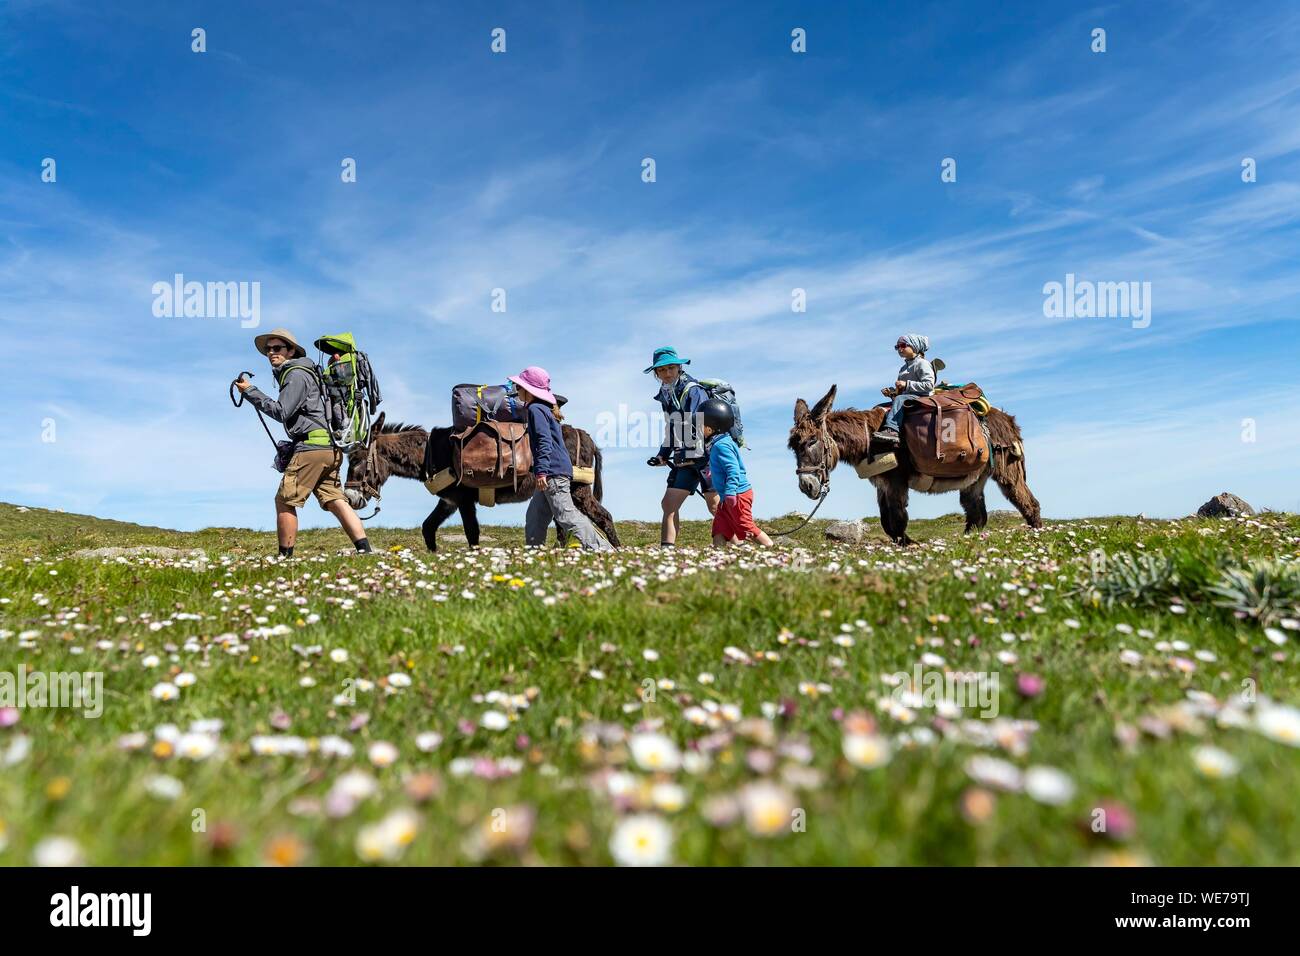 France, Pyrenees Atlantiques, Basque Country, Saint Etienne de Baigorry region, family hiking on a donkey on the paths of Saint Jacques de Compostelle Stock Photo